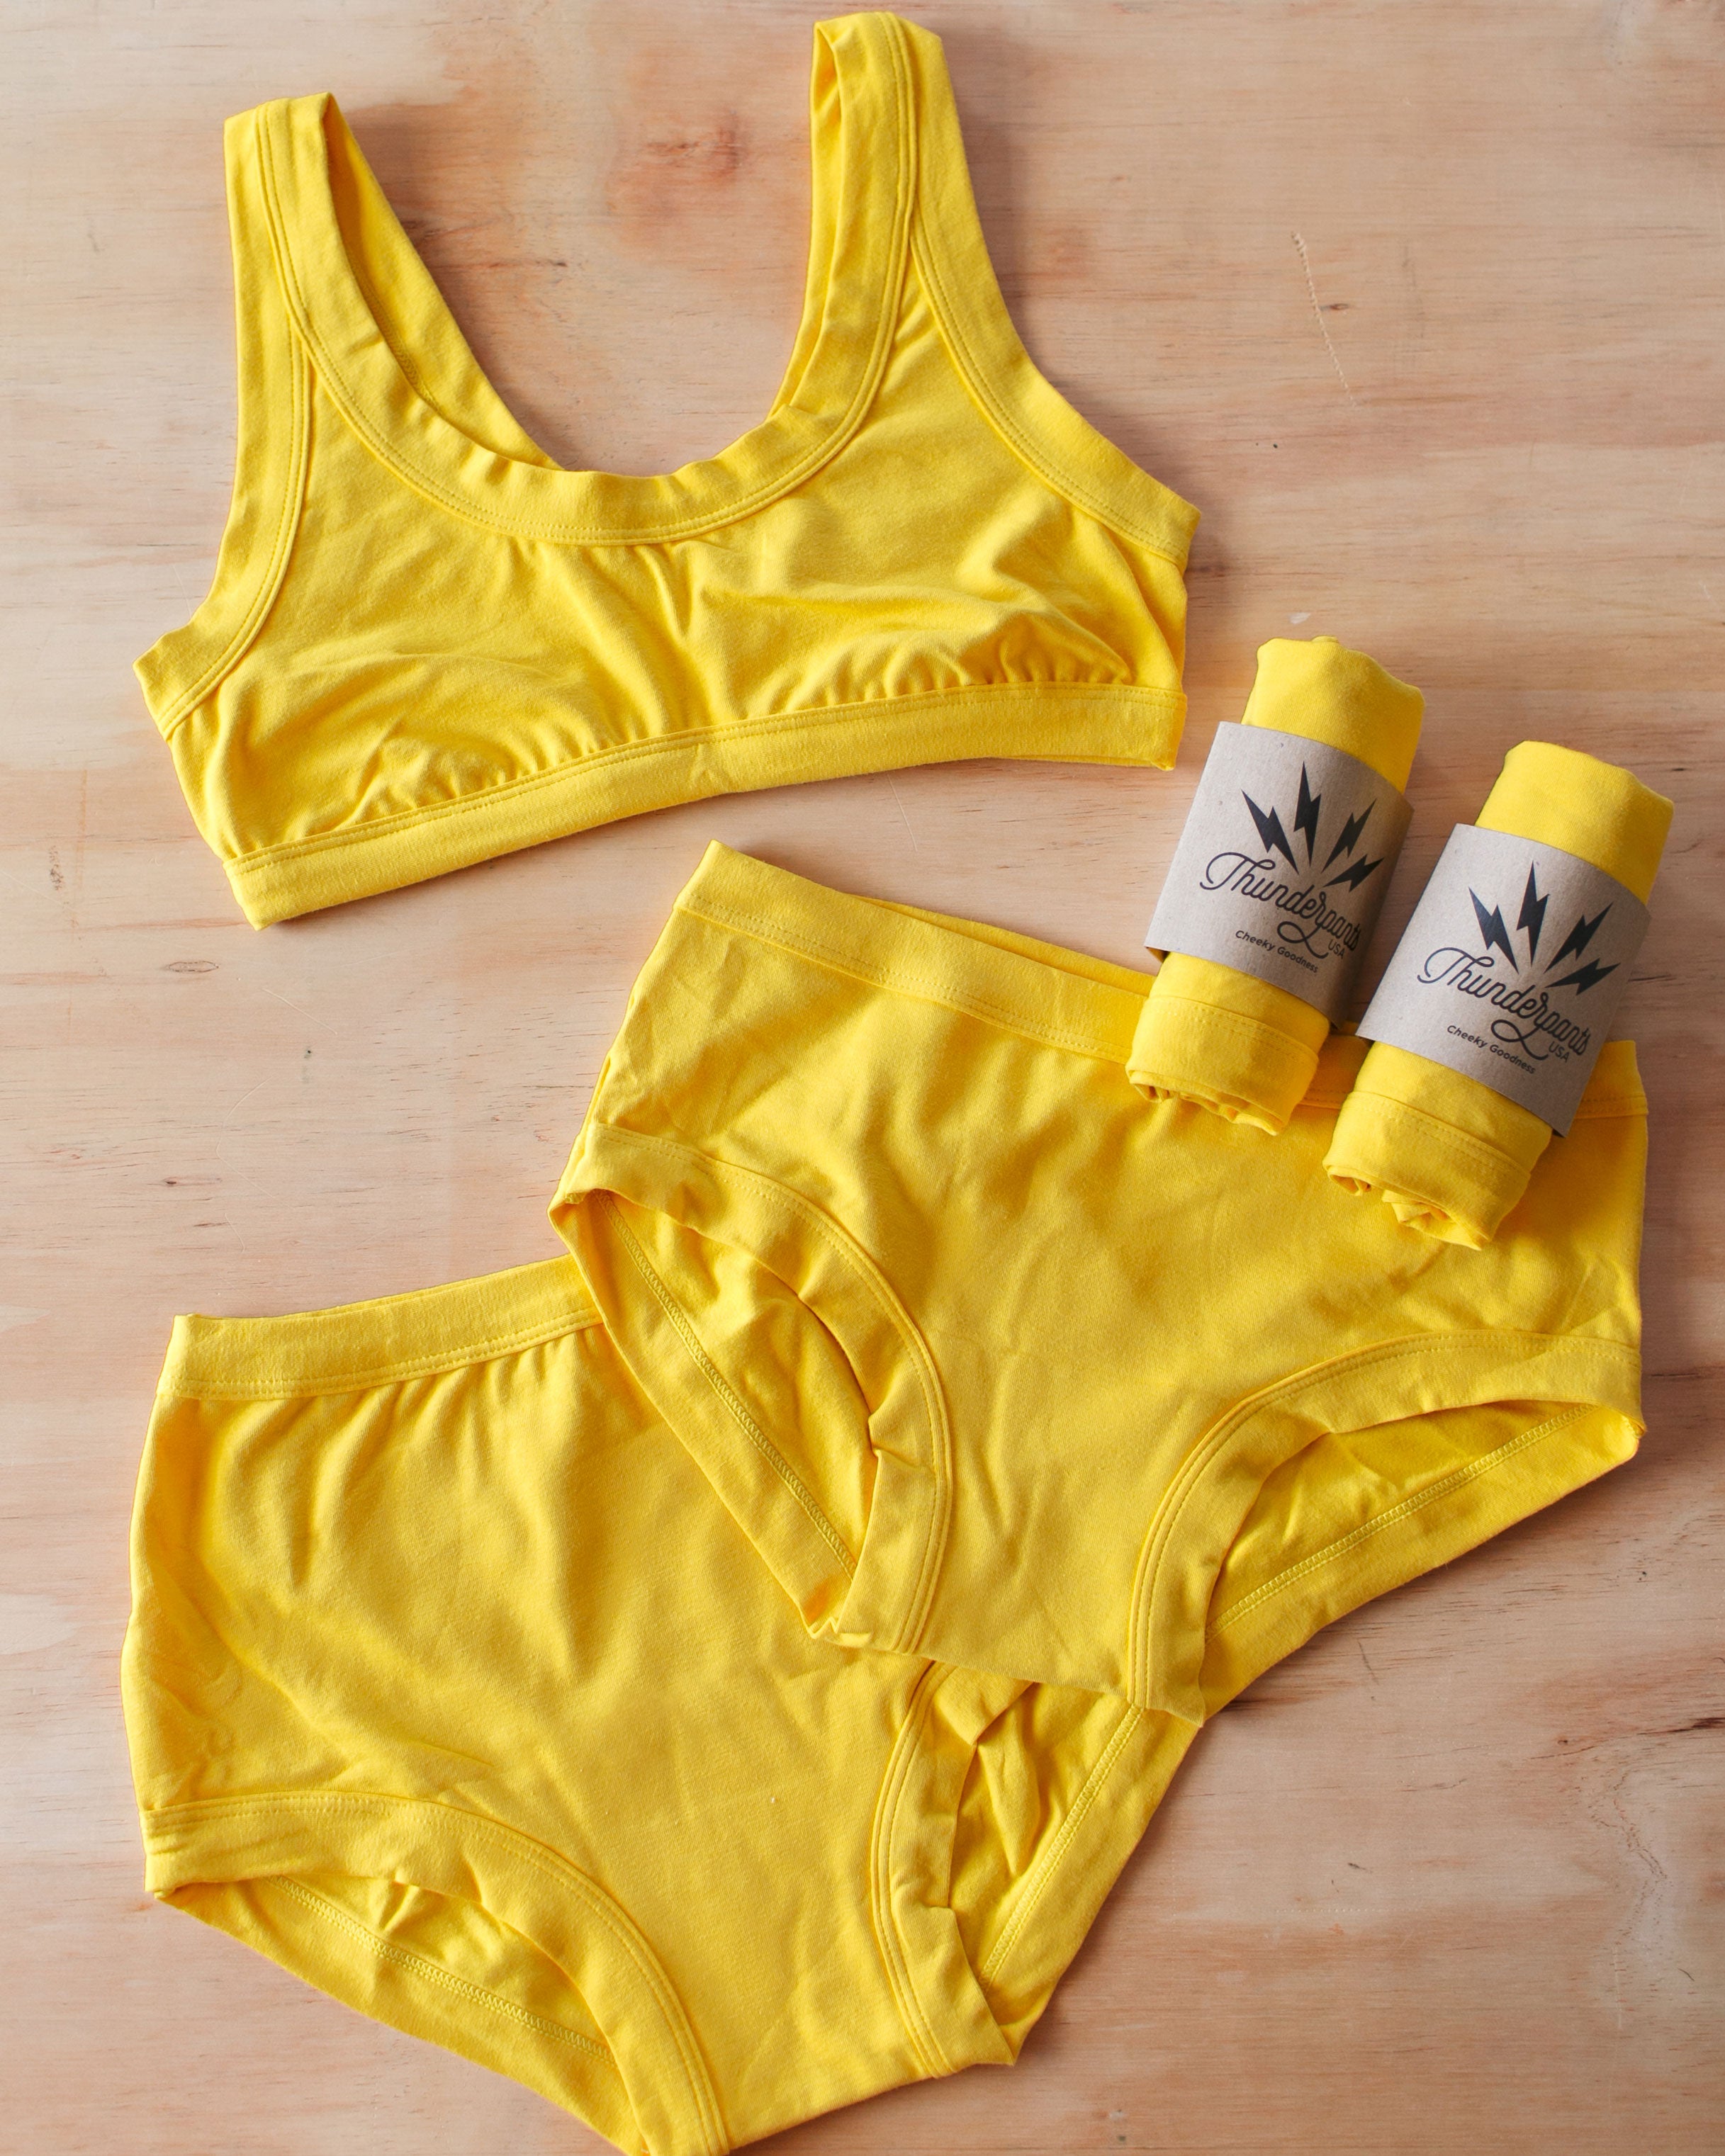 Flat lay of Thunderpants Organic Cotton Bralette, Hipster style and Original style underwear with packaged underwear in Golden Yellow color.